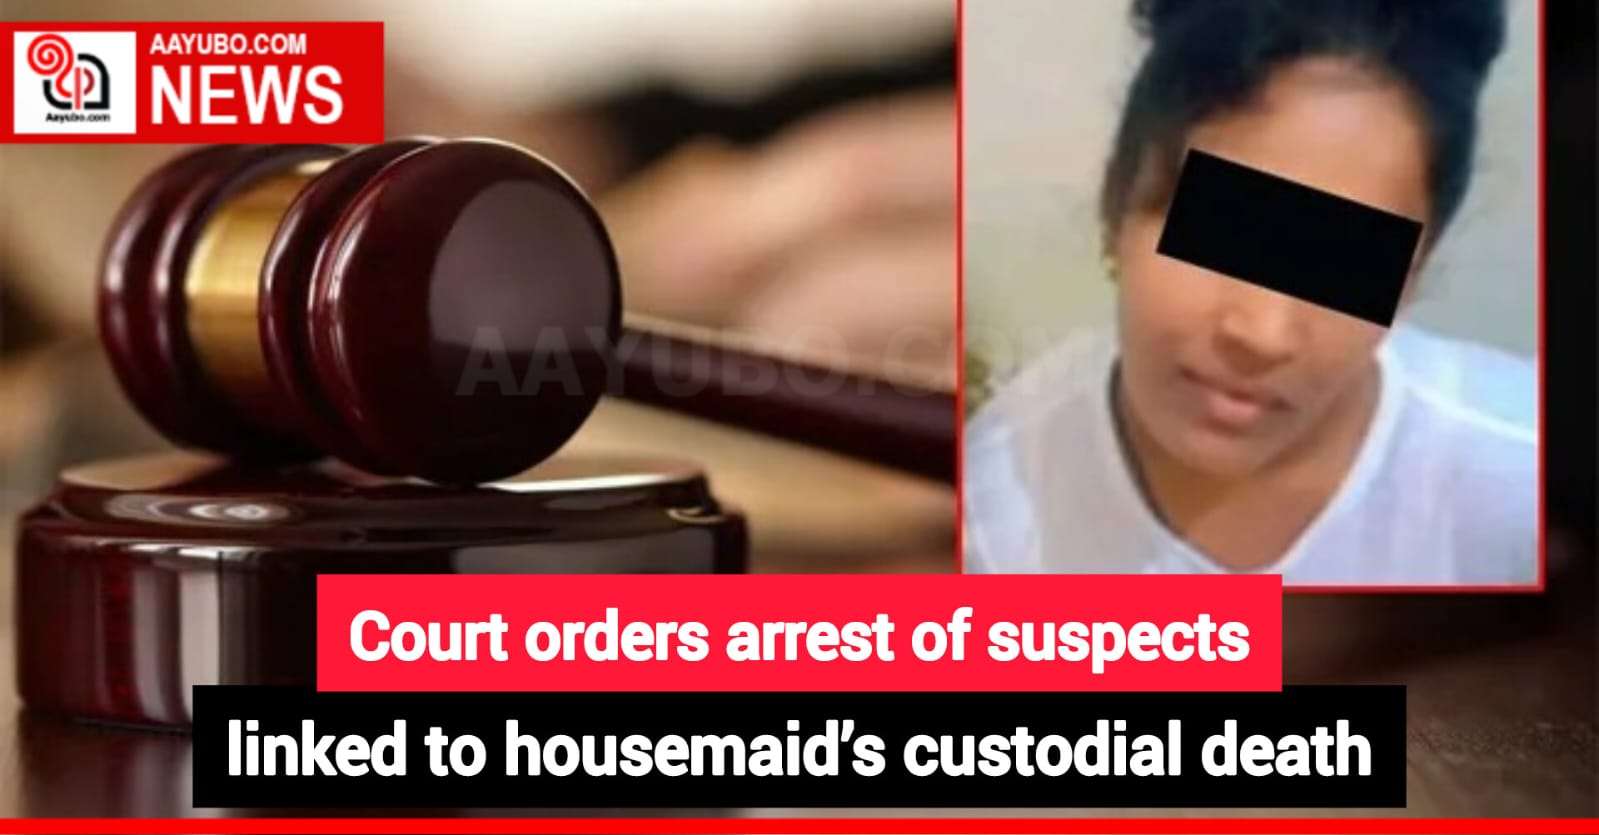 Court orders arrest of suspects linked to housemaid’s custodial death